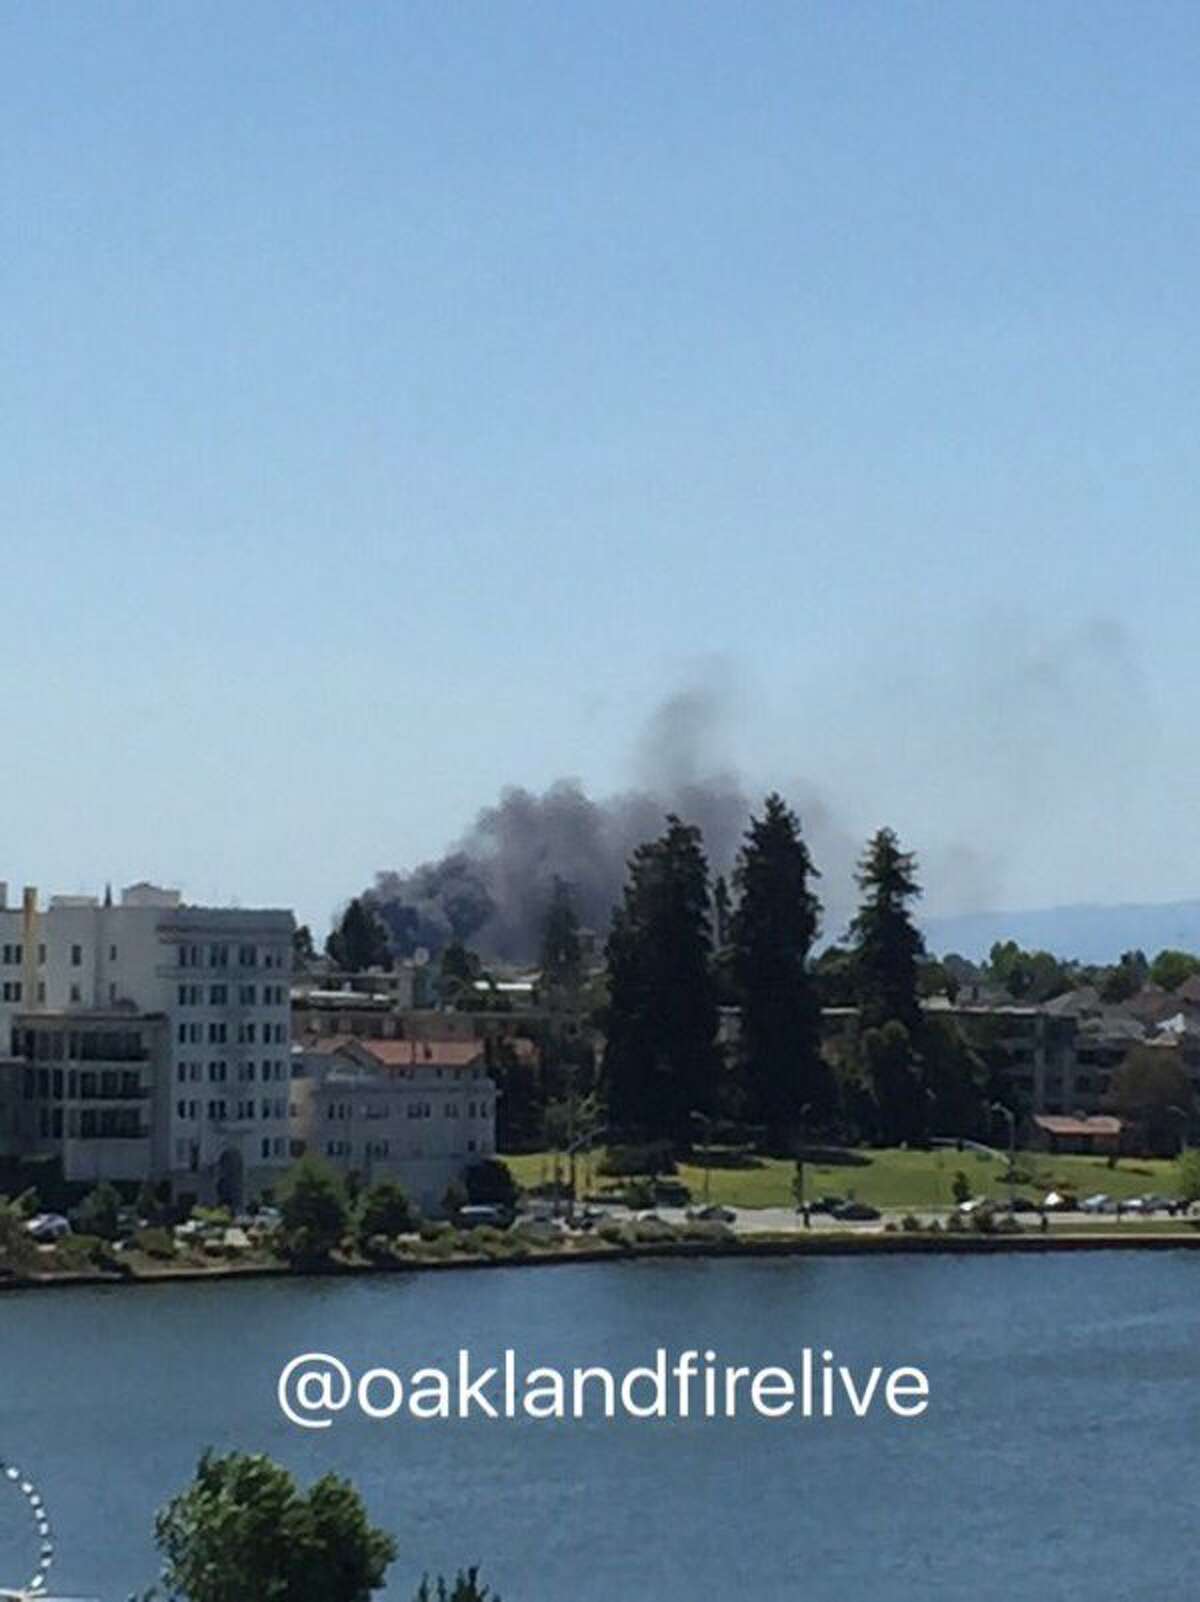 A fire burning on a pier in Oakland sent a large plume of smoke over the East Bay the afternoon of Saturday, April 30, 2016.